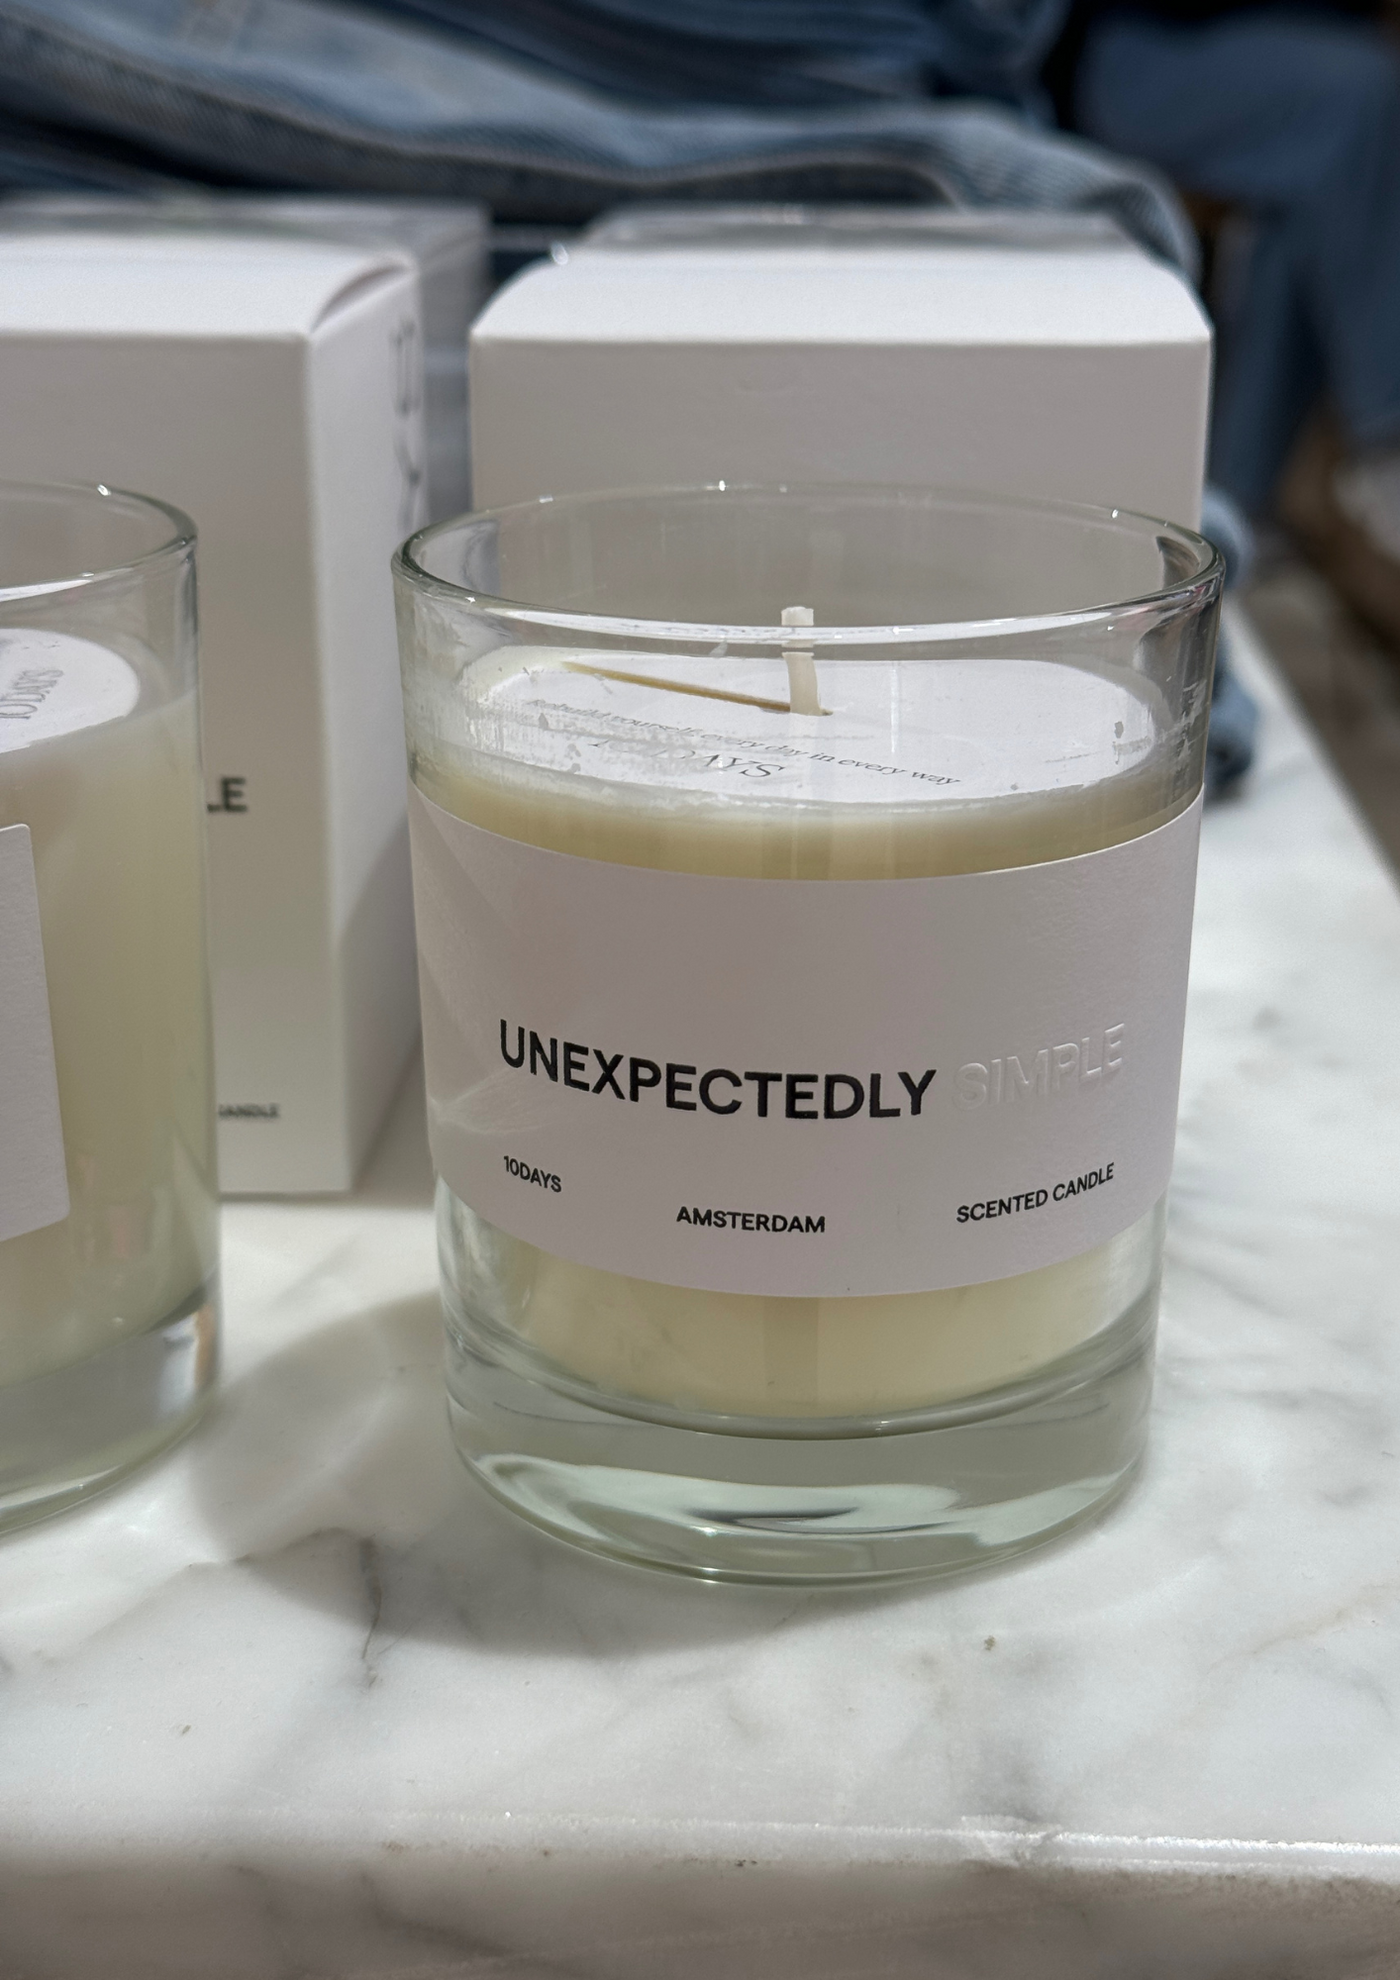 10 Days | Unexpectedly Scented Candle